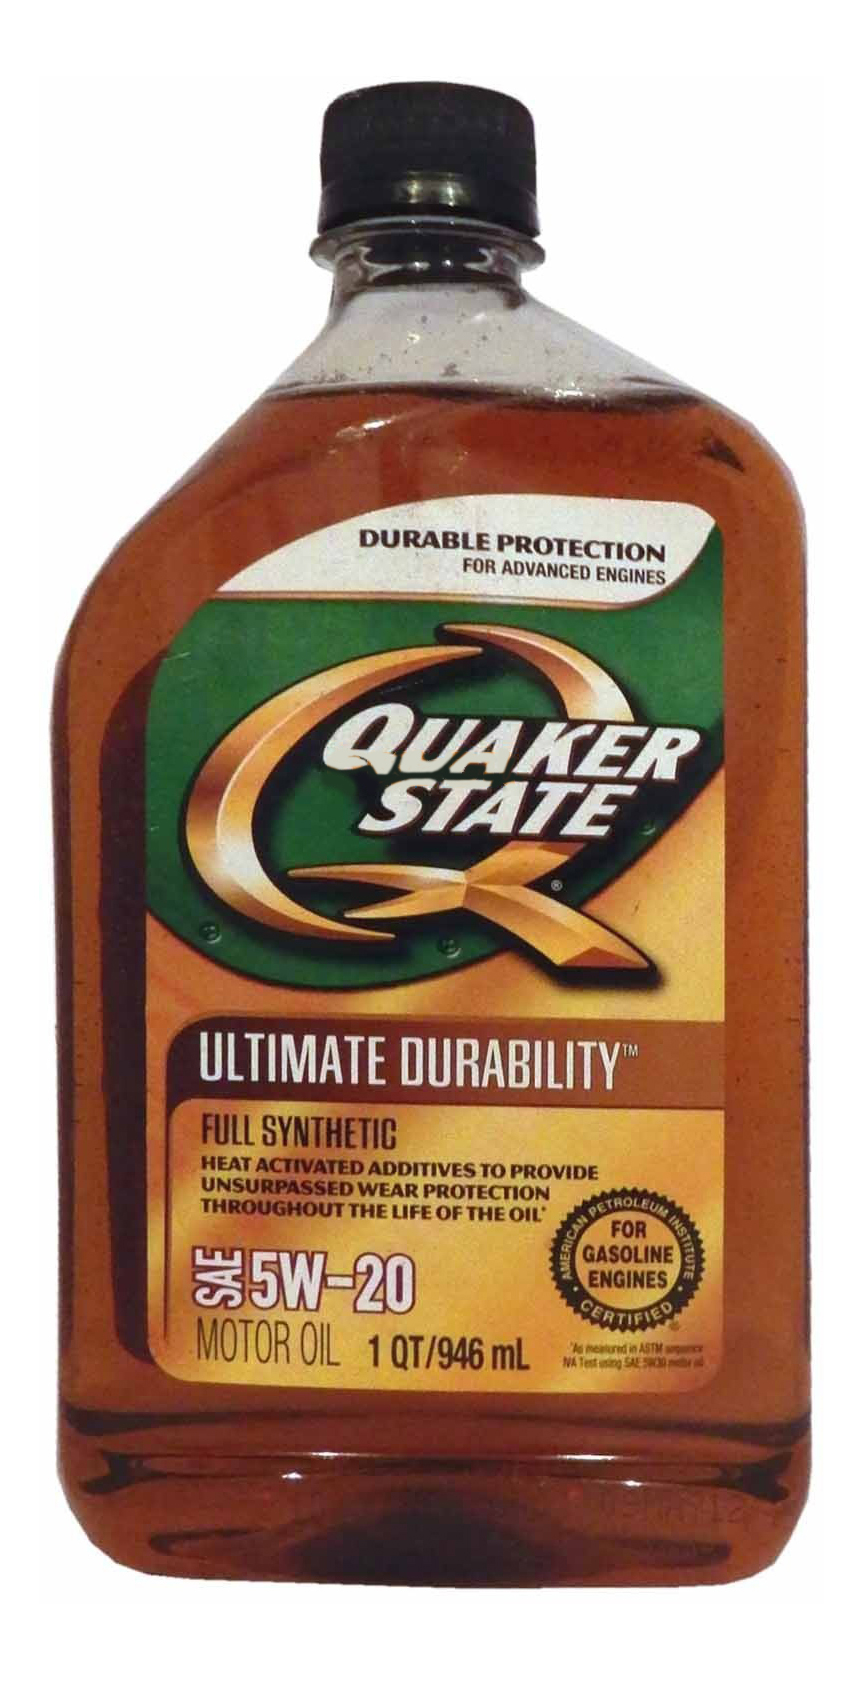 quaker-state-ultimate-durability-sae-5w-20-full-synthetic-motor